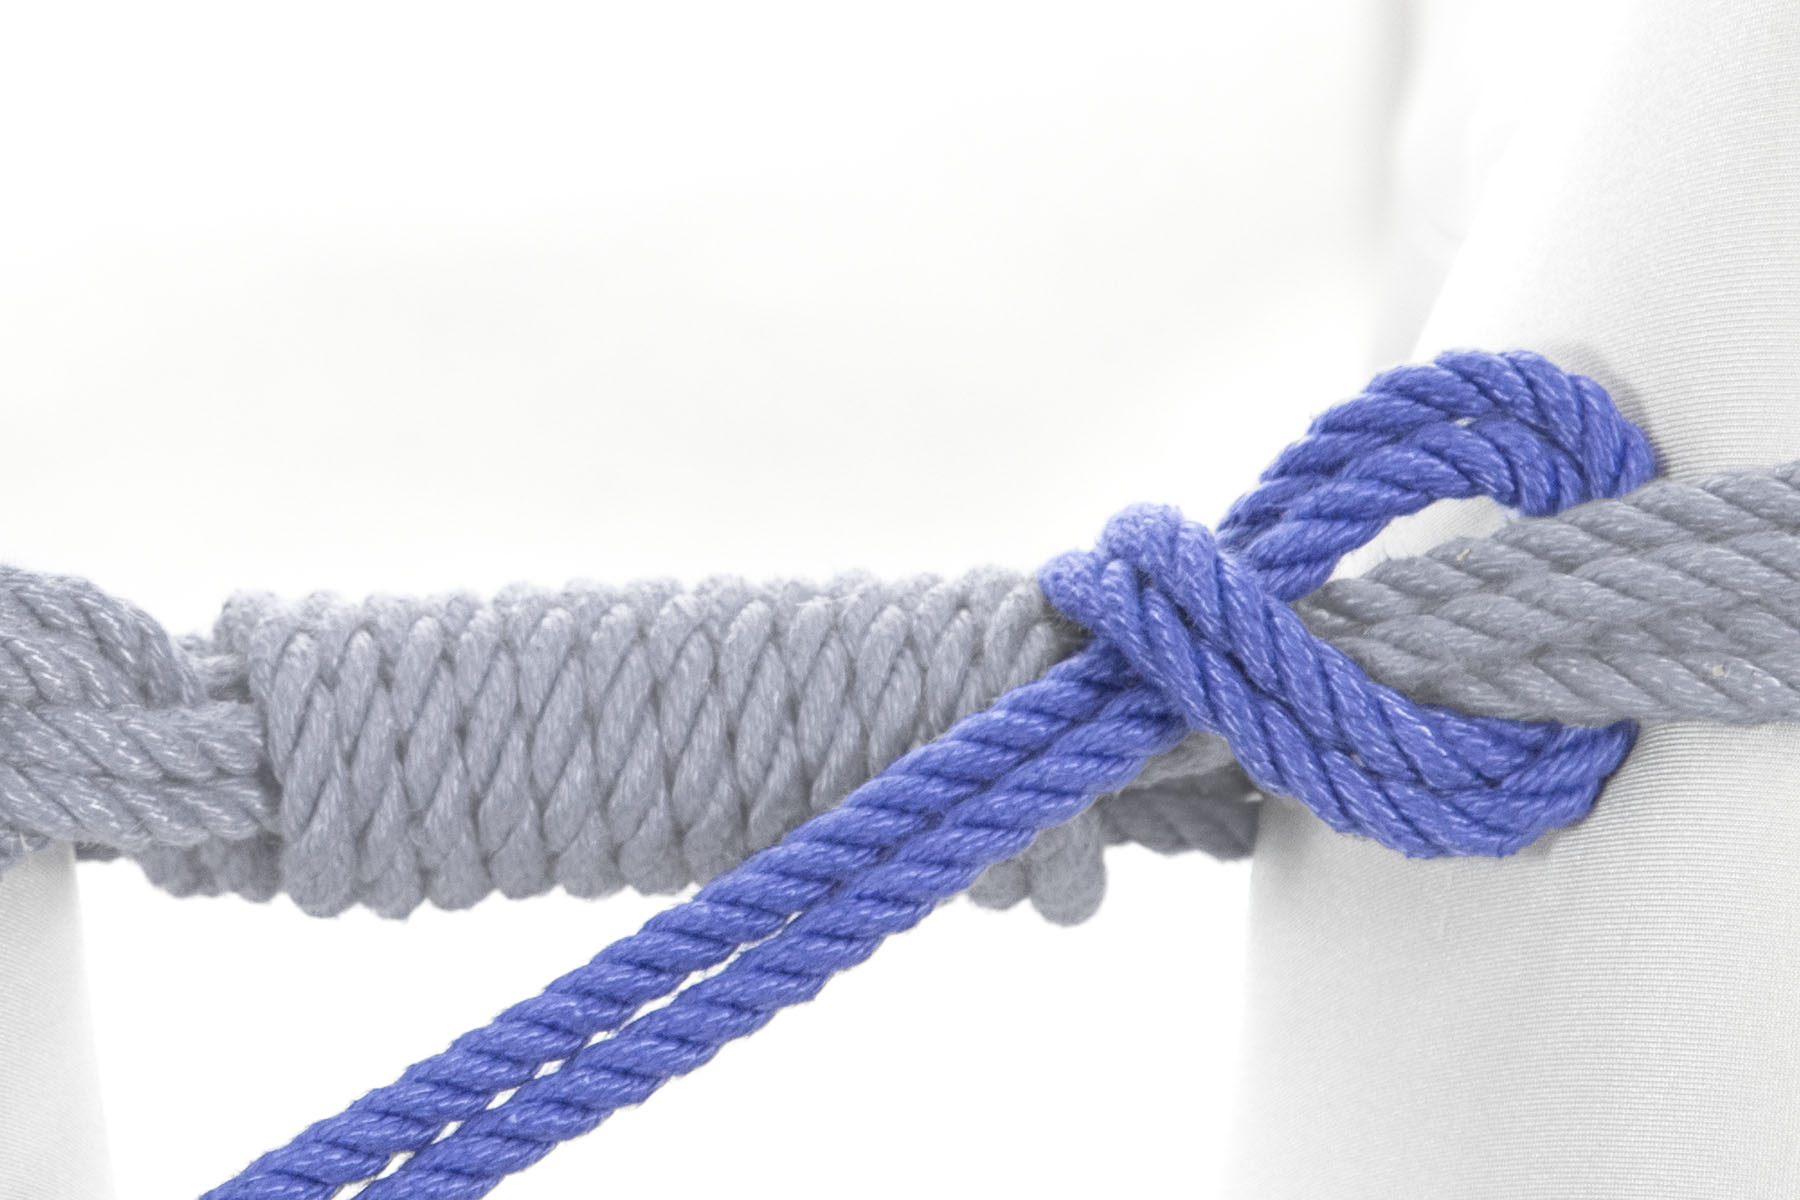 The rope doubles back and crosses under itself, making a half hitch around the upper wraps.